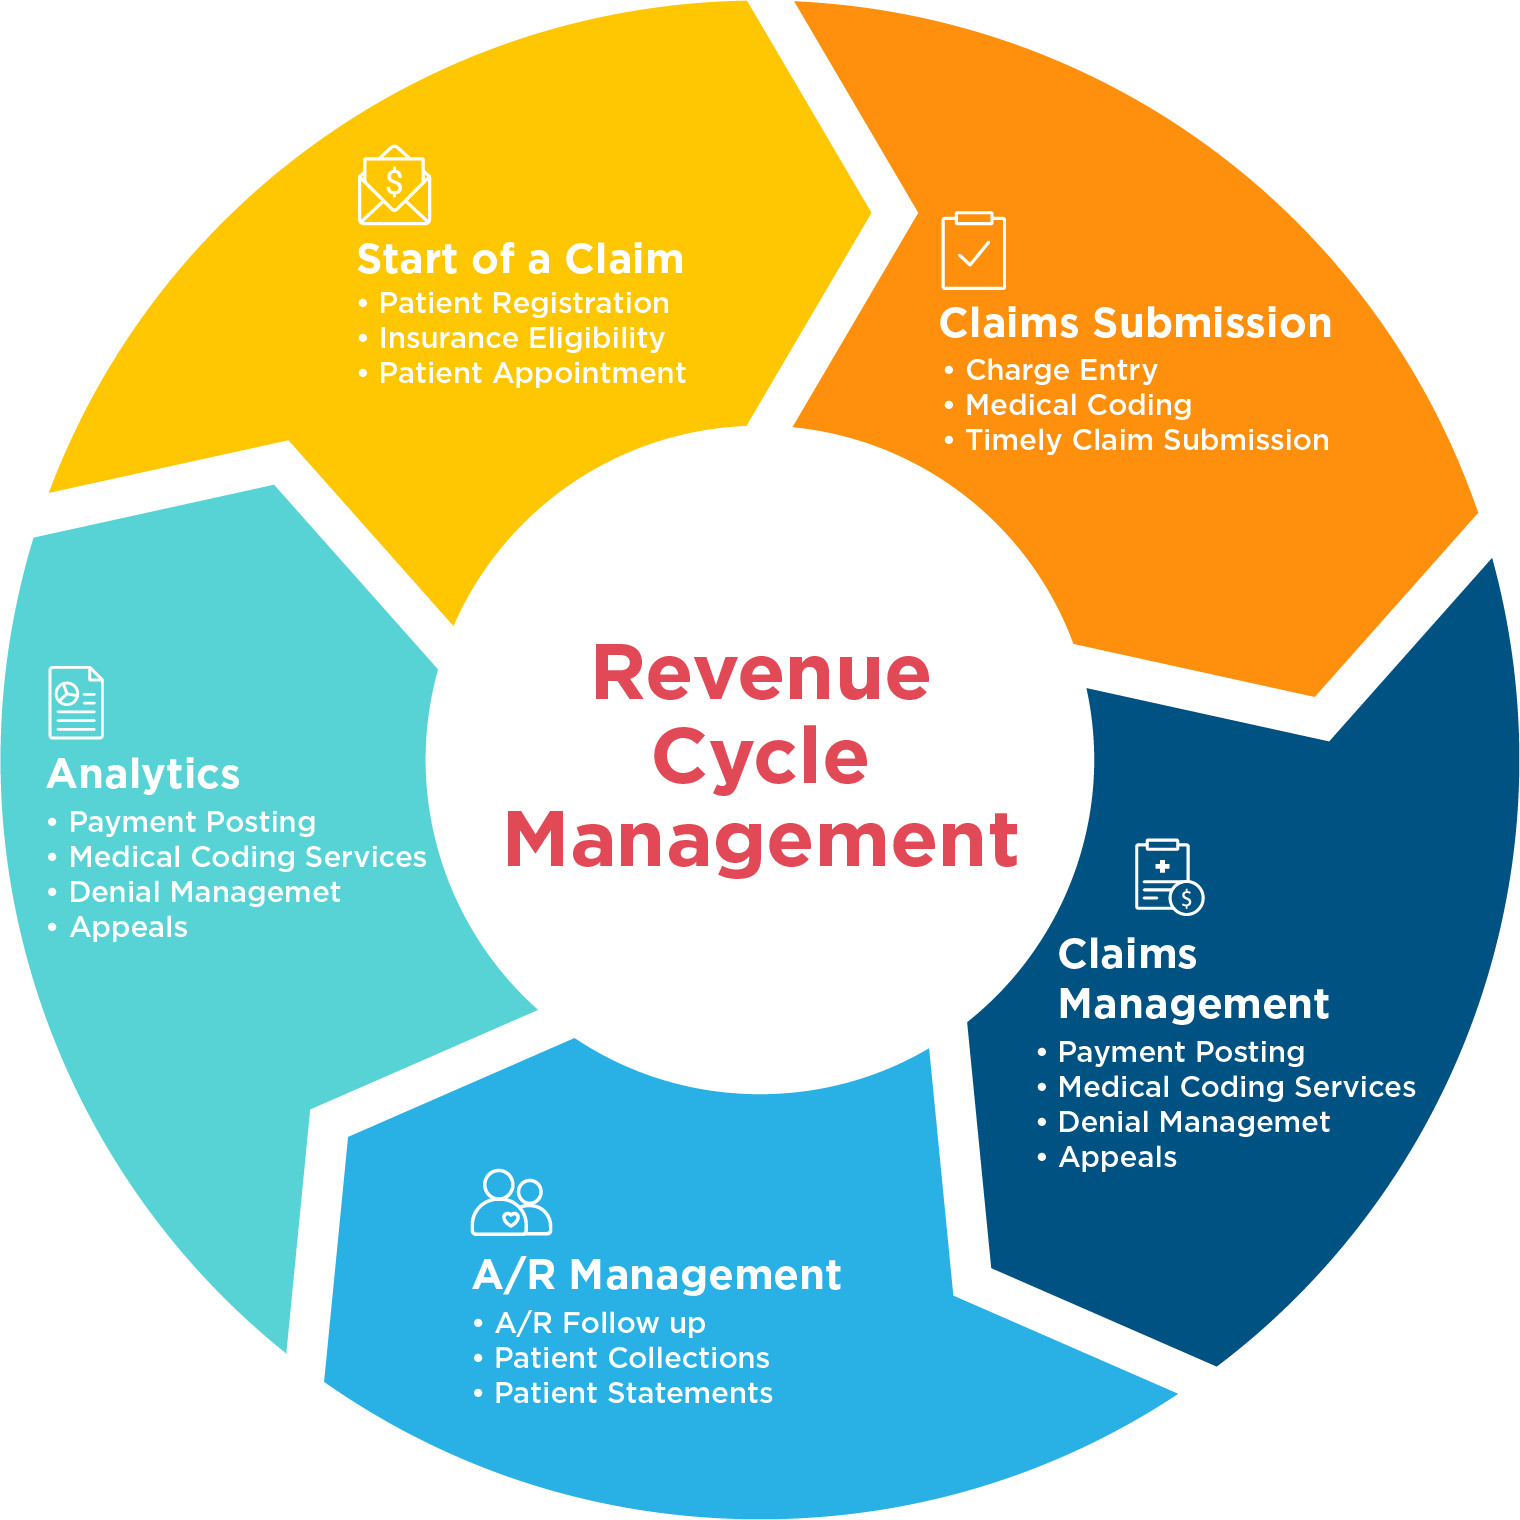 Revenue Cycle Management Market Growth, Analaysis and Advancement Outlook 2019 to 2025